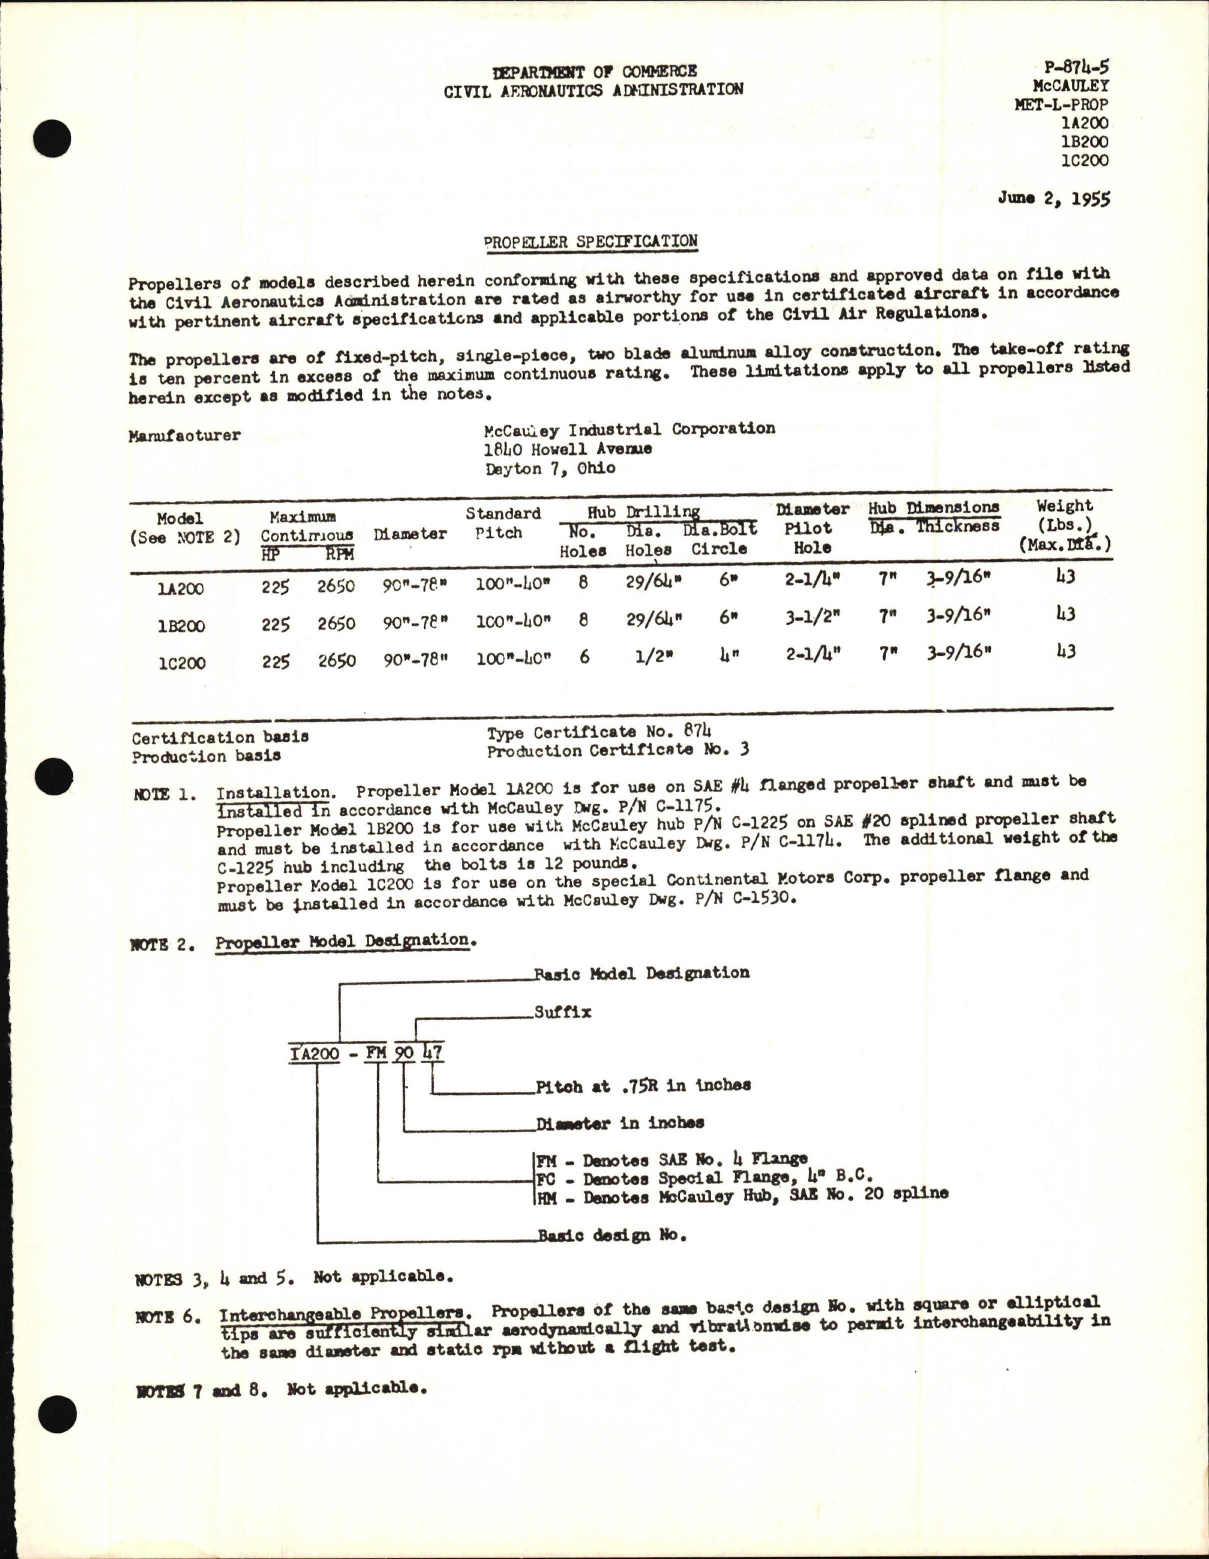 Sample page 1 from AirCorps Library document: 1A200, 1B200, and 1C200 MET-L-PROP